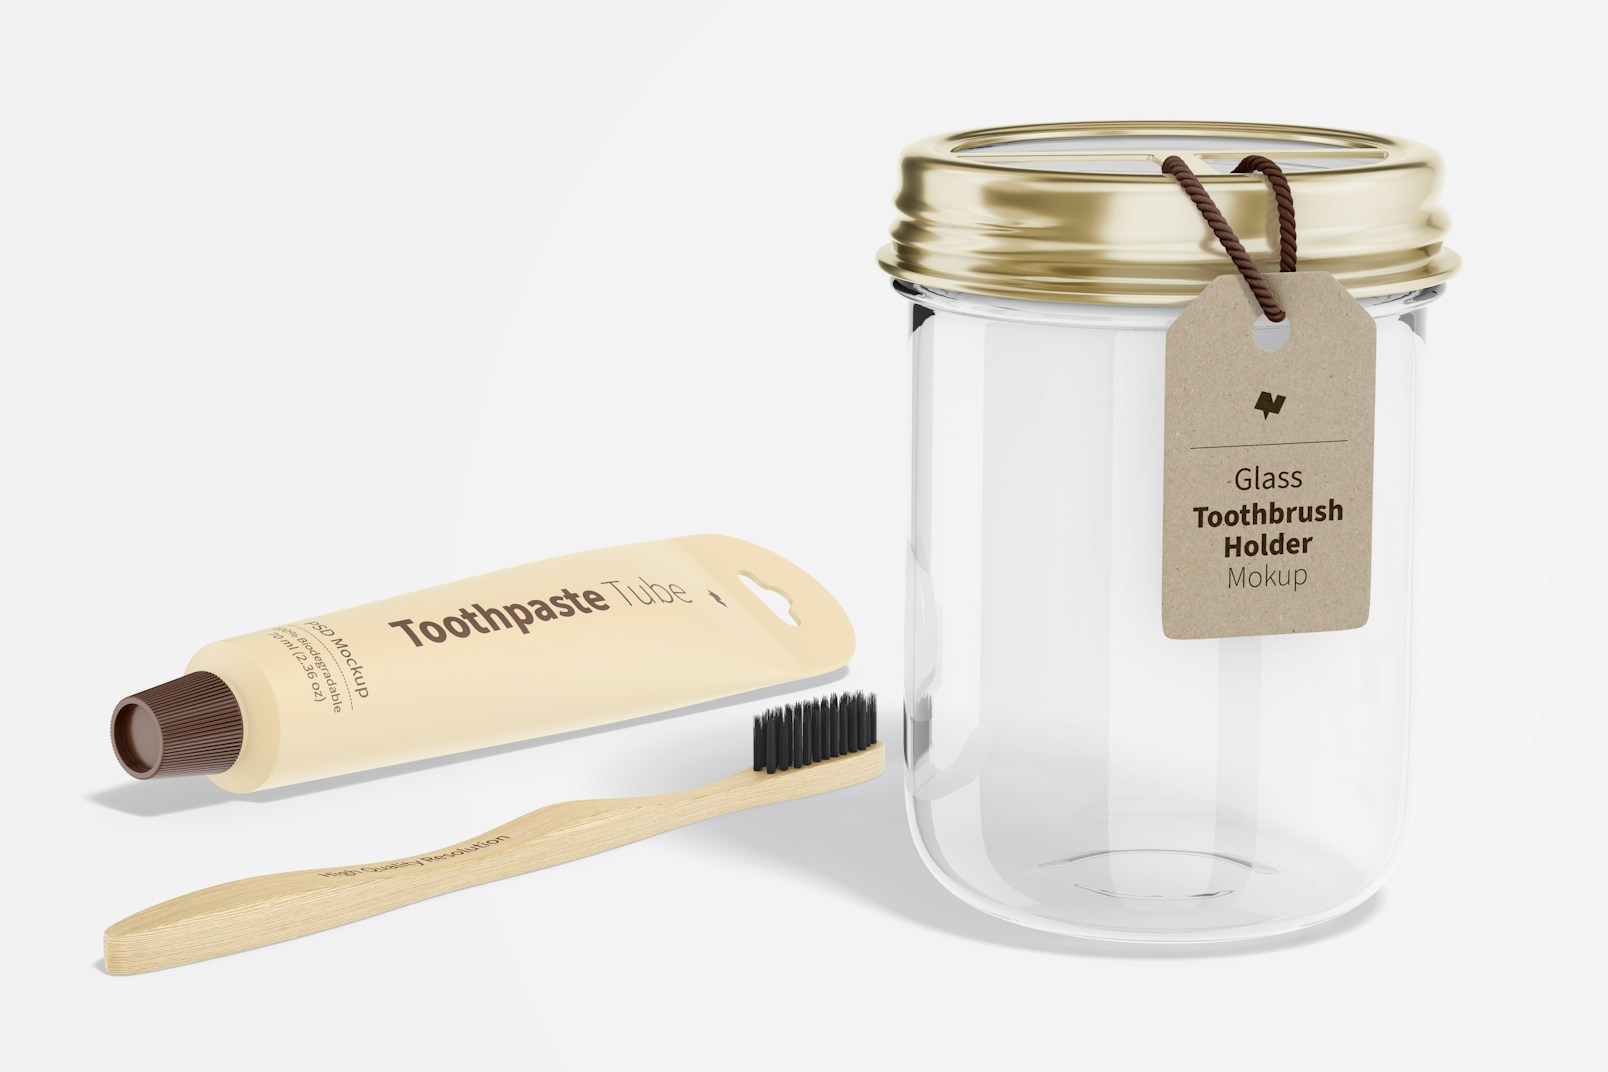 Glass Toothbrush Holder Mockup, Perspective